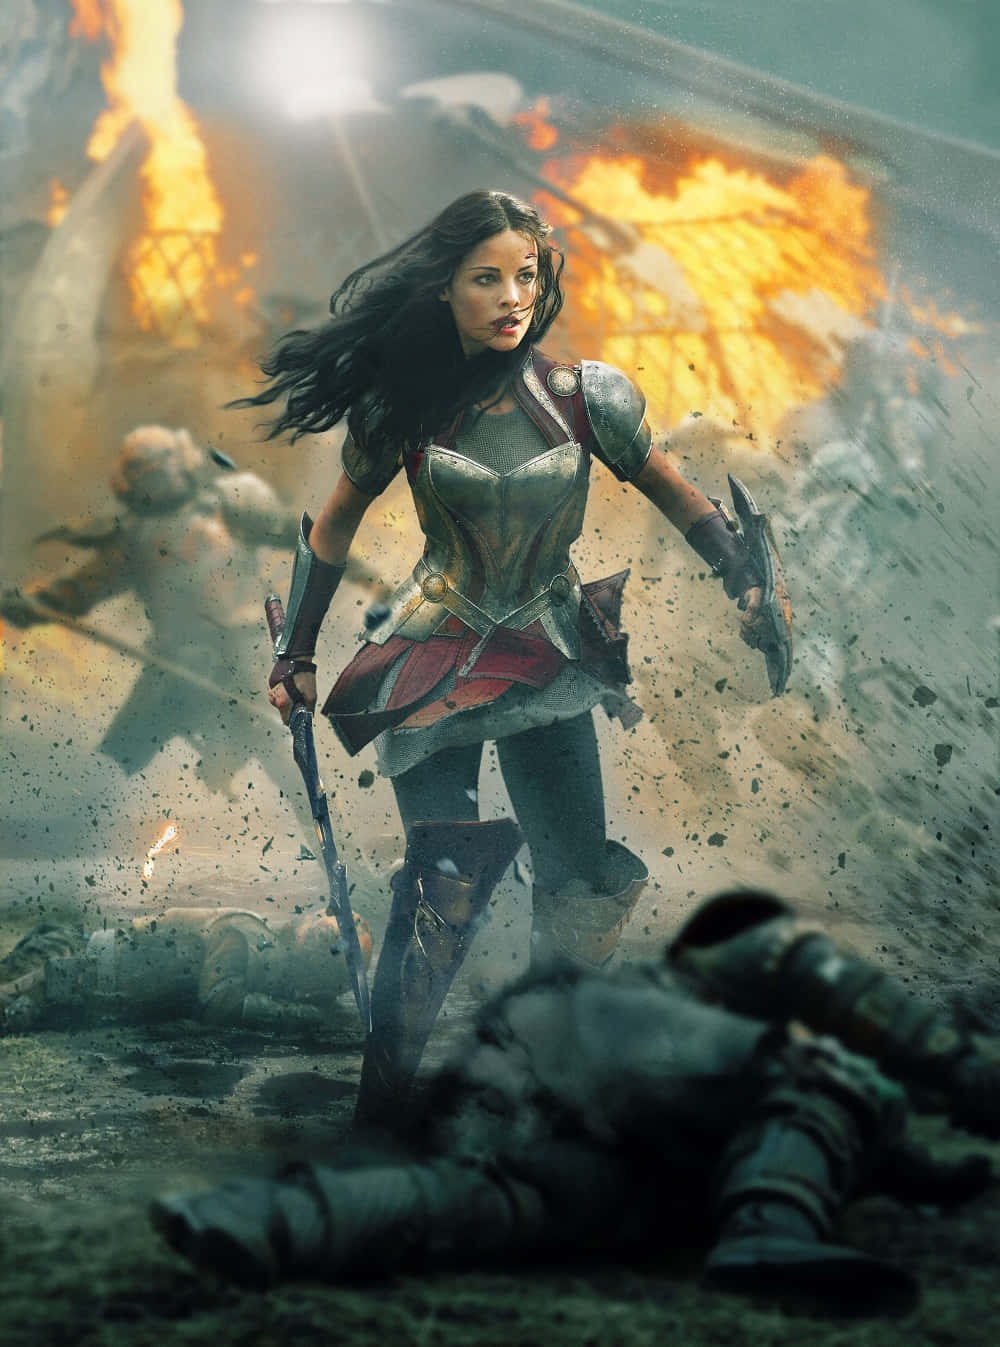 Fighting for justice as Lady Sif Wallpaper